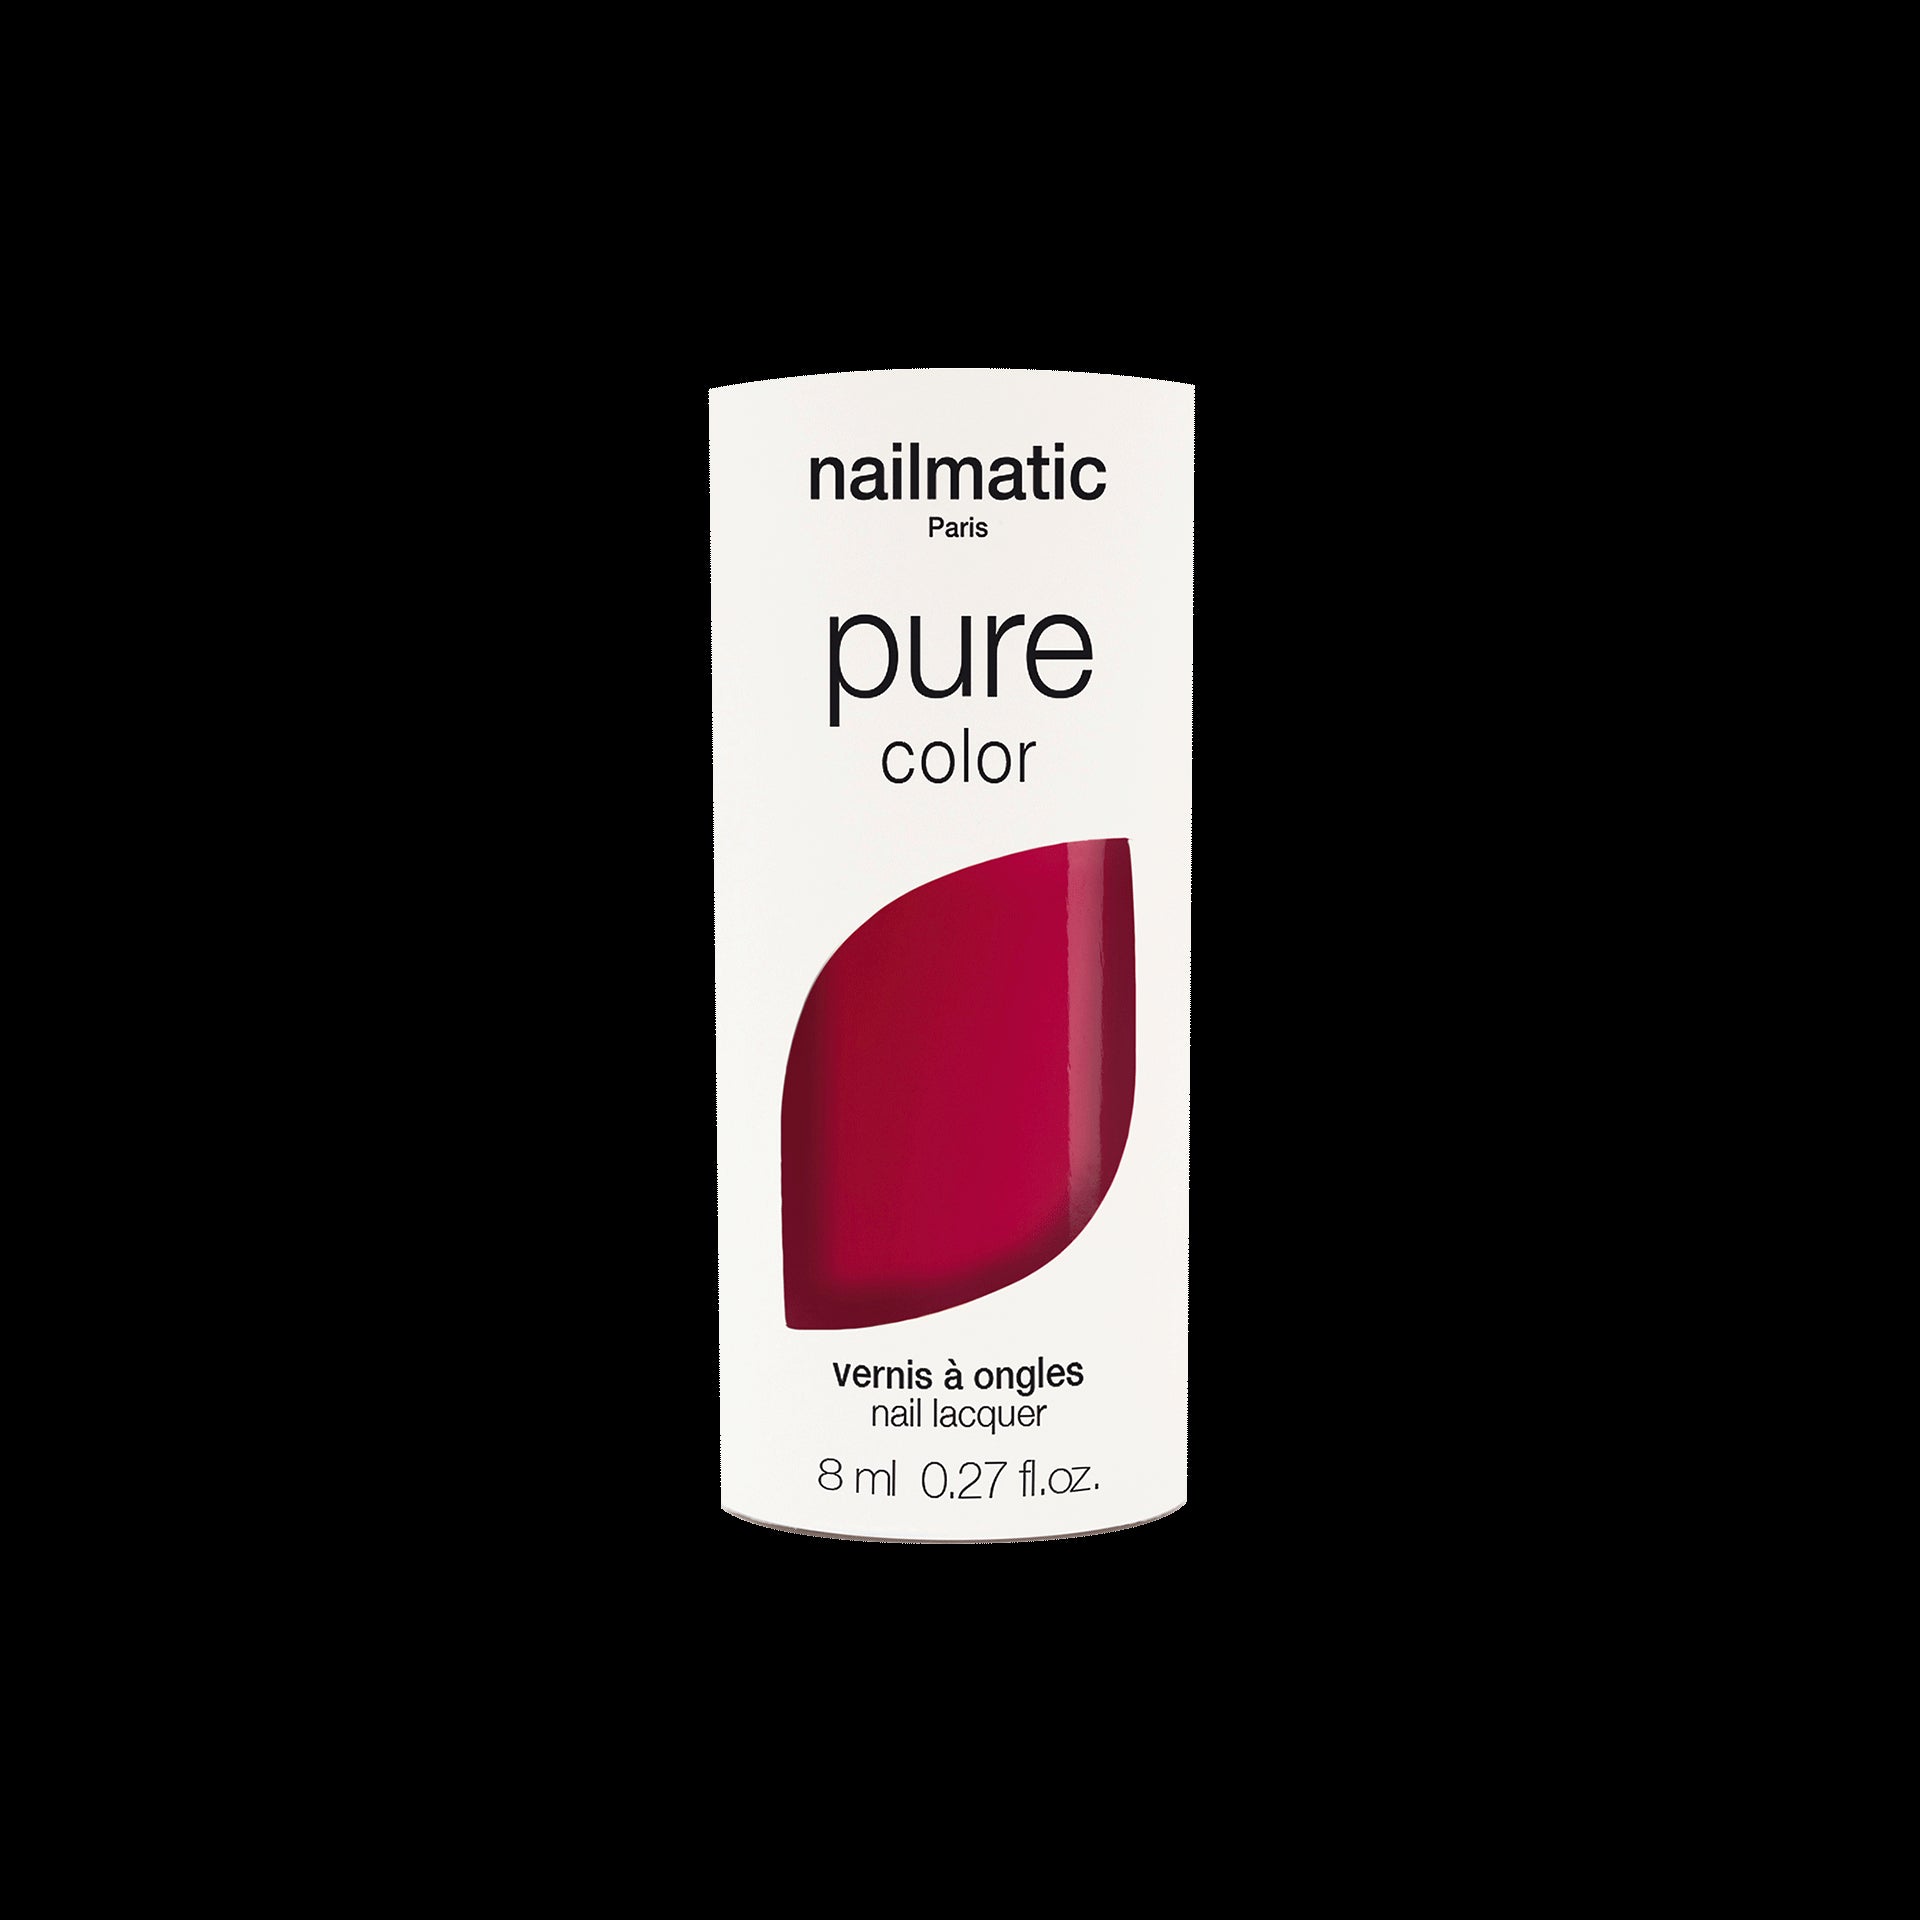 intense raspberry nail polish paloma pure color with packaging